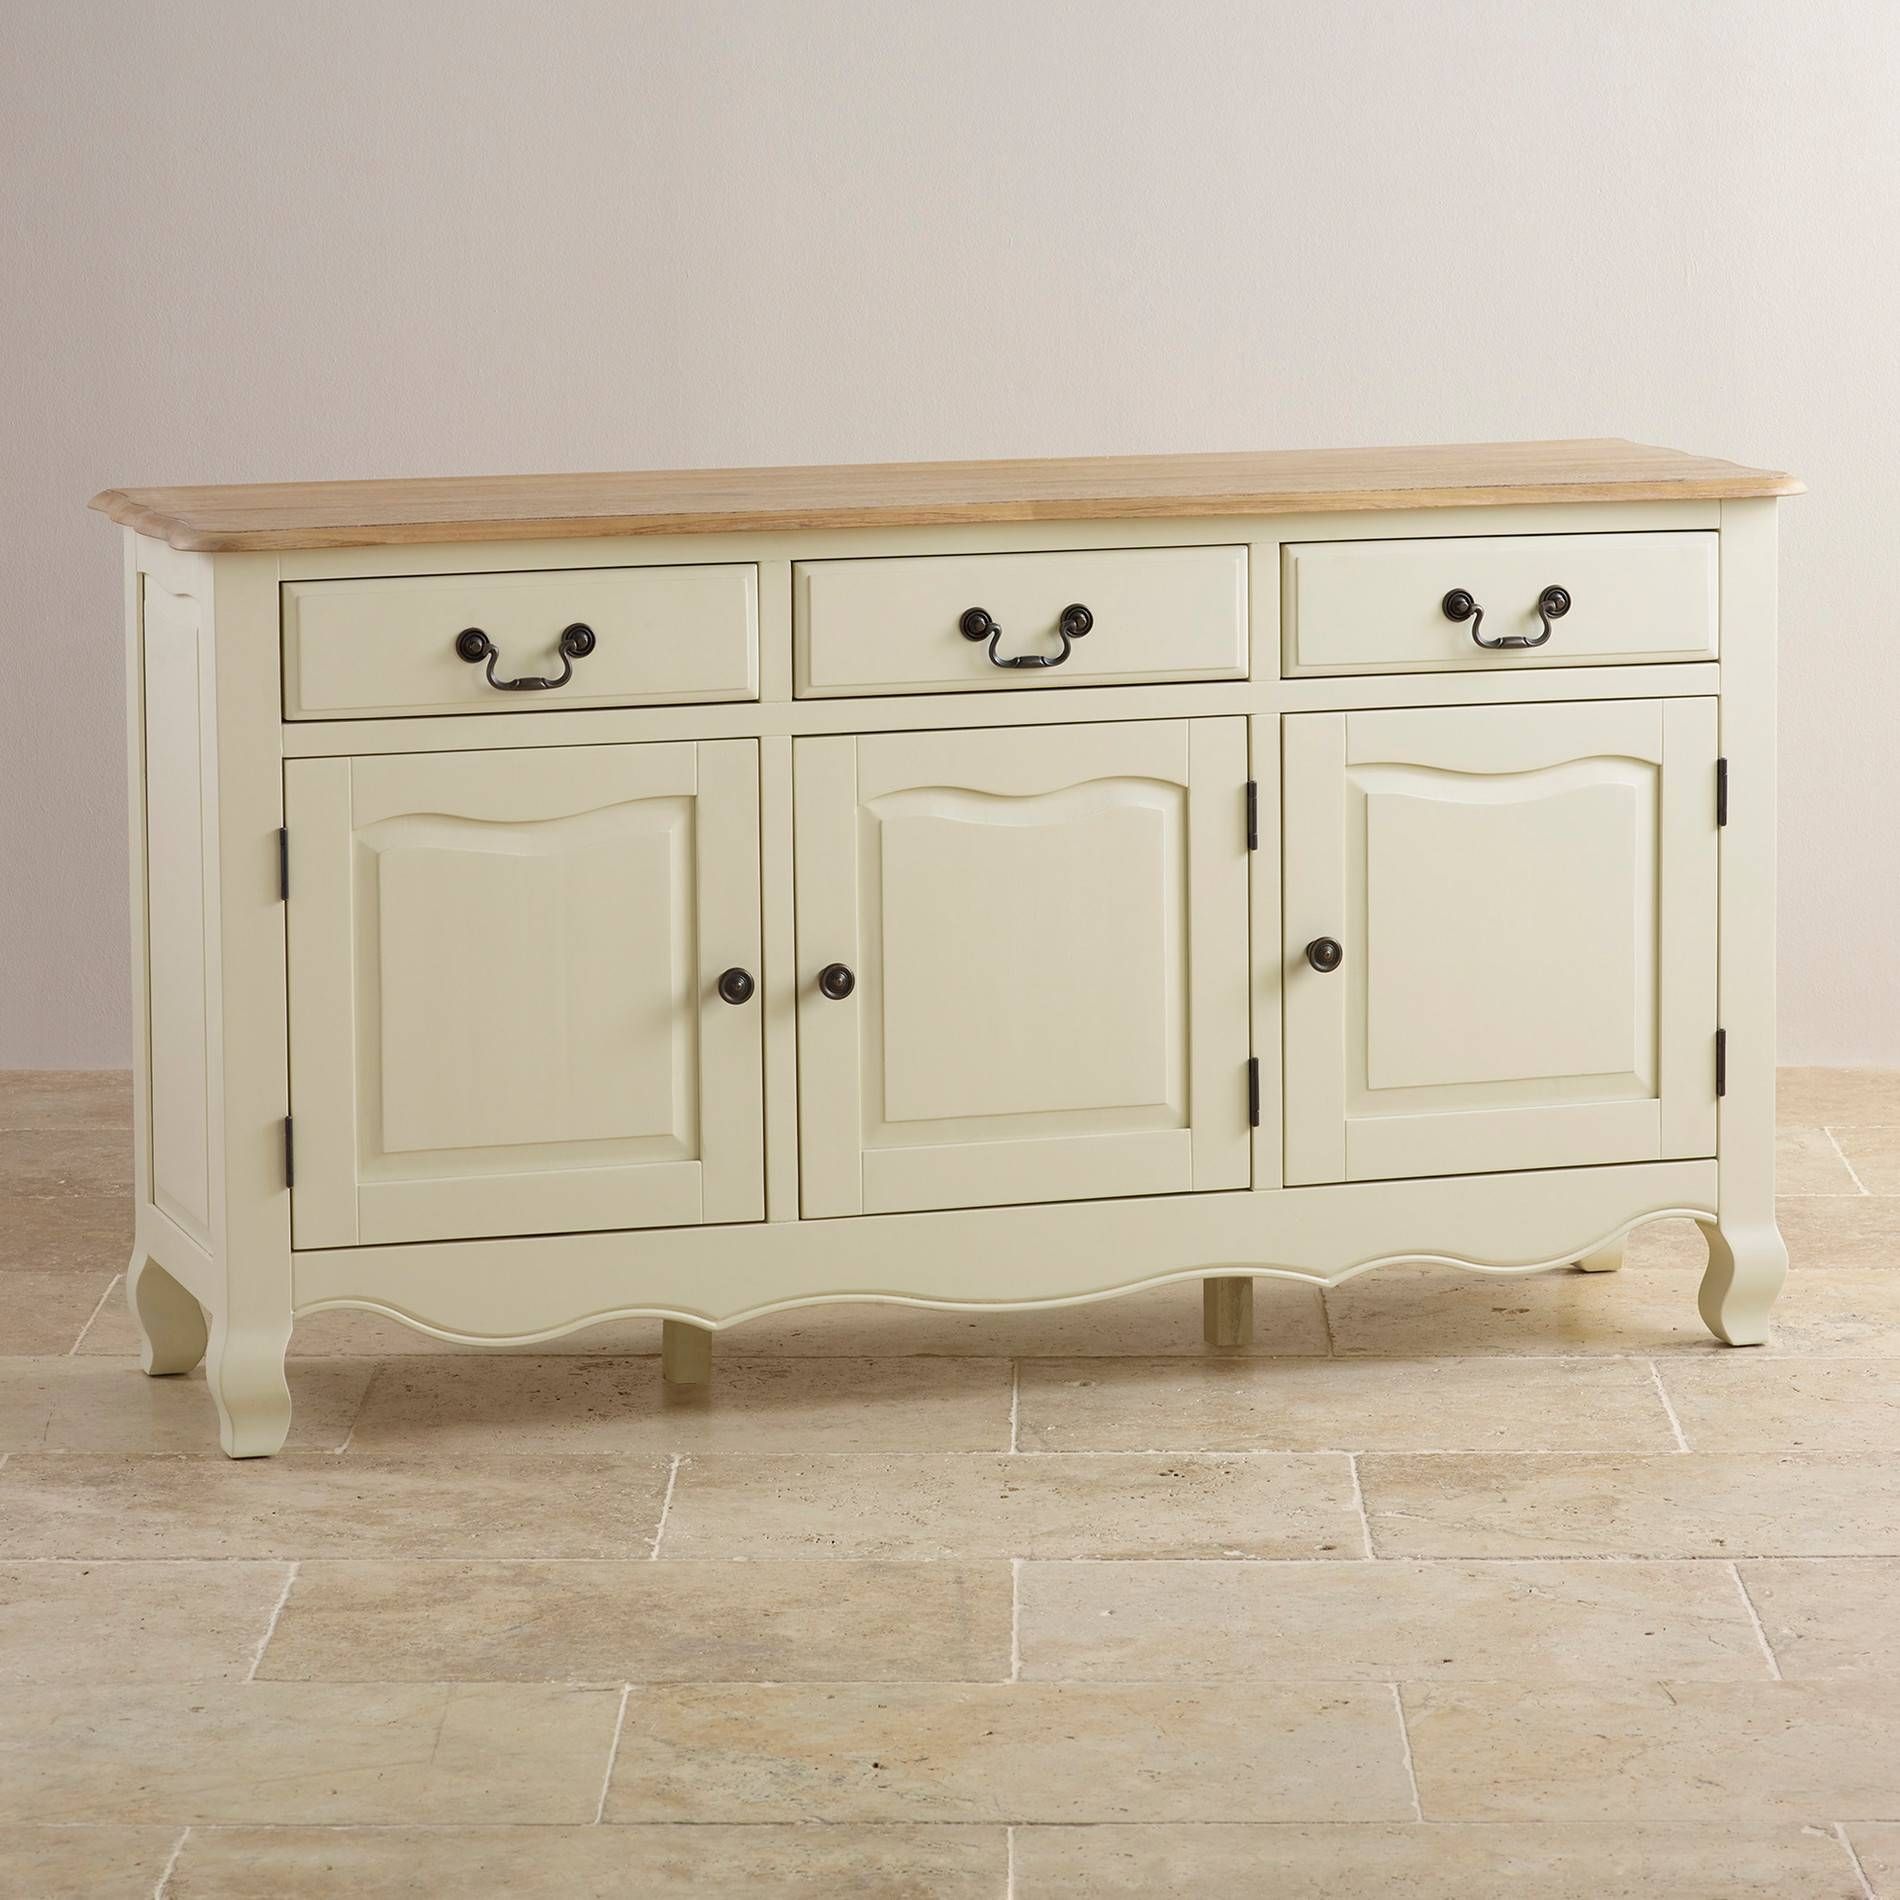 Sideboards | 100% Solid Hardwood | Oak Furniture Land With Regard To White And Wood Sideboards (View 19 of 30)